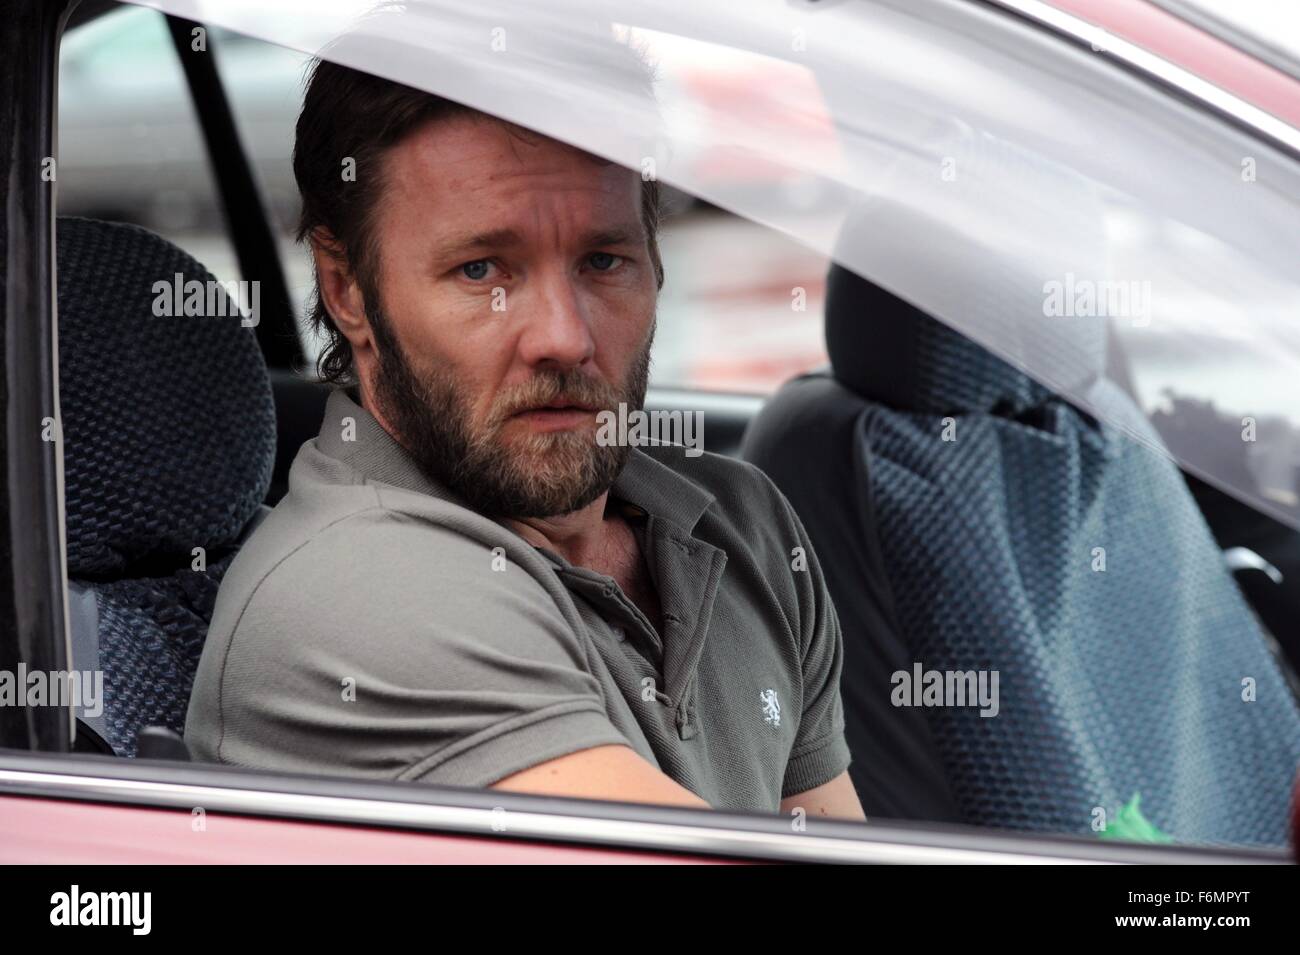 RELEASE DATE: 13 August 2010. MOVIE TITLE: Animal Kingdom. STUDIO: Porchlight Films. PLOT: Tells the story of seventeen year-old J (Josh) as he navigates his survival amongst an explosive criminal family and the detective who thinks he can save him. PICTURED: JOEL EDGERTON as Barry Brown. Stock Photo